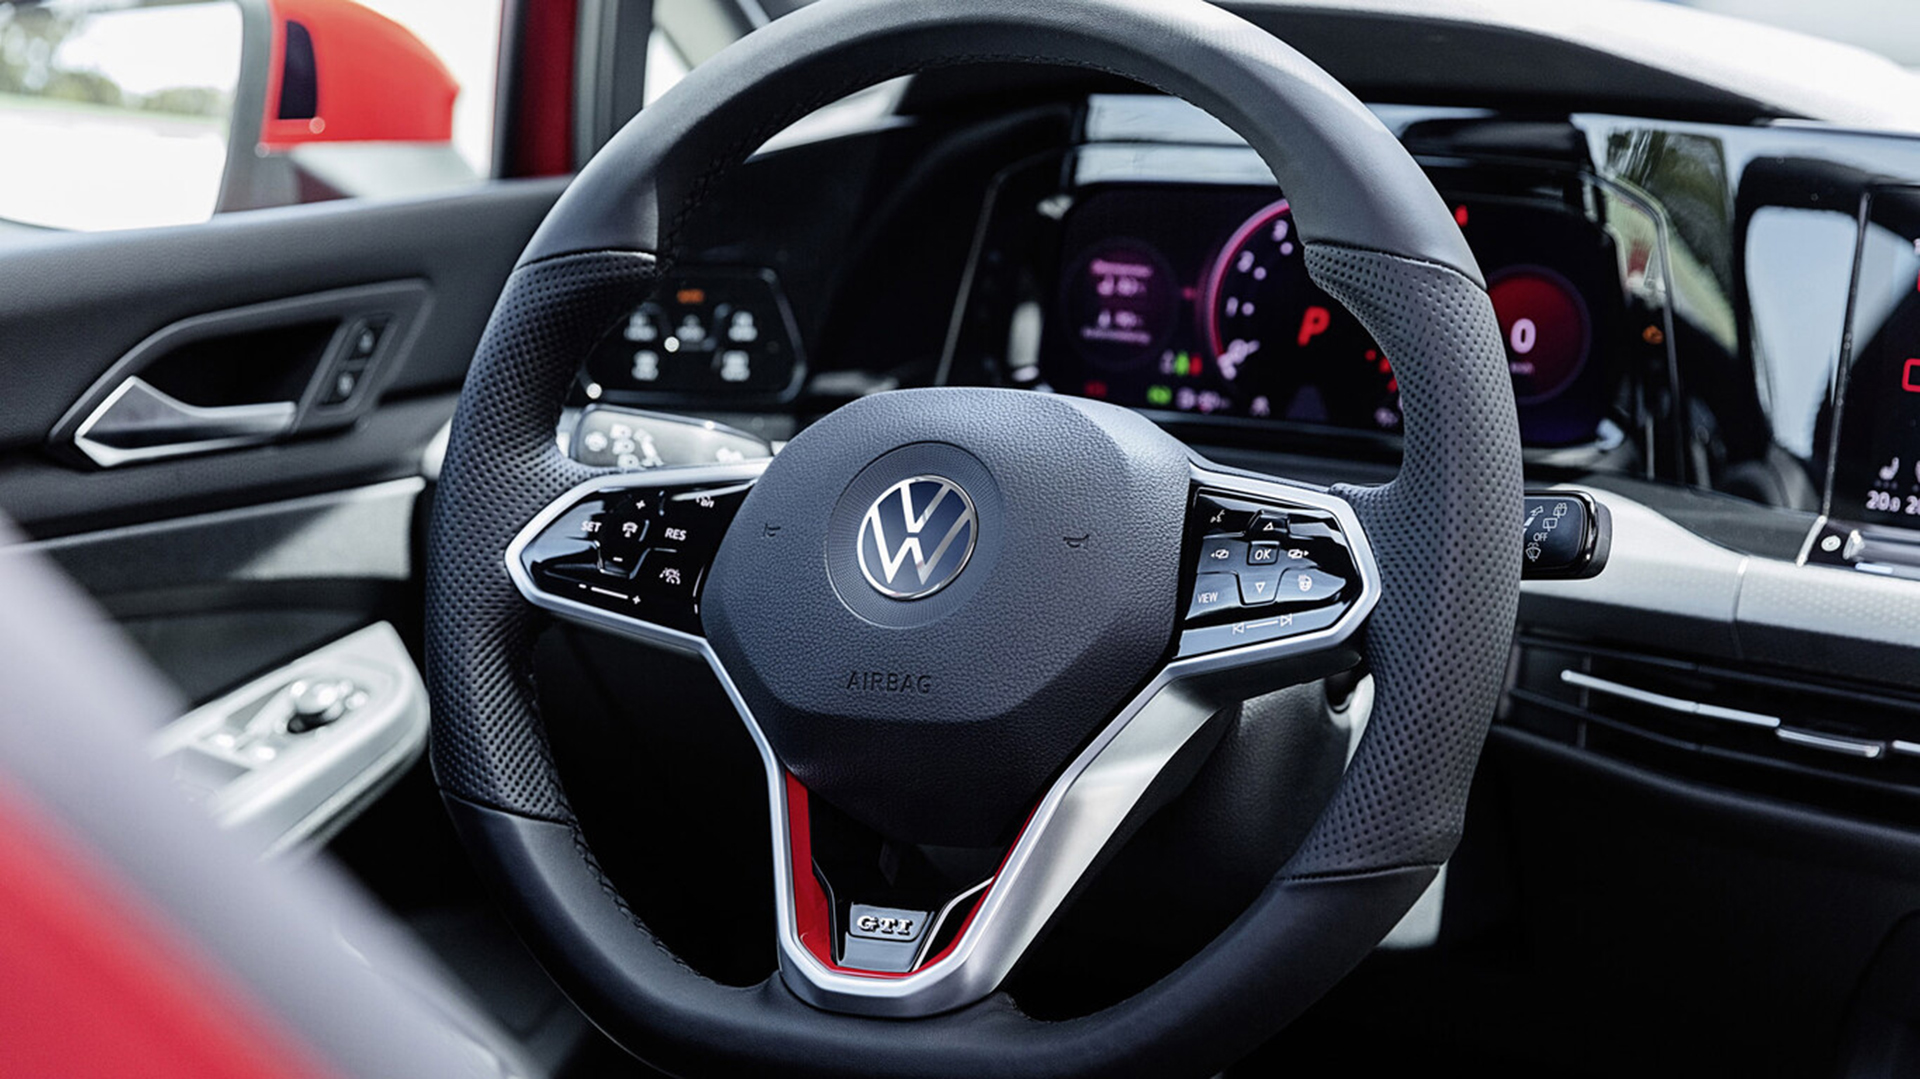 Steering wheels with capacitive buttons did not achieve the sensitivity that users expected and will be removed from new models